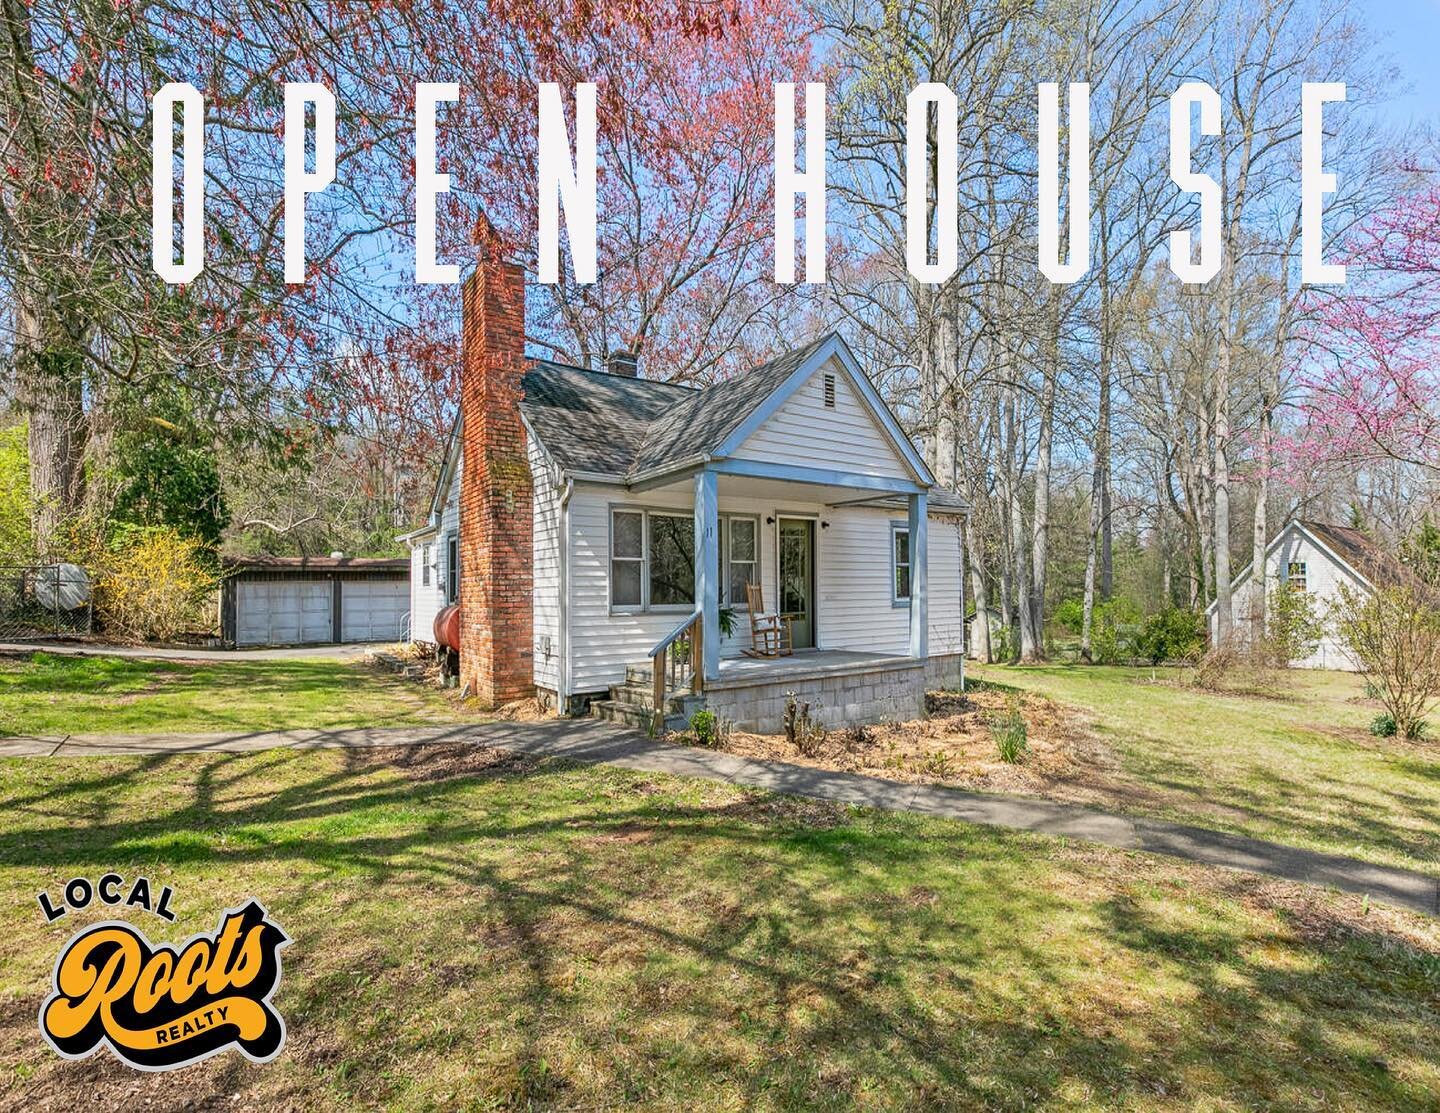 Asheville Open House Sunday, April 2nd from 2-4 pm! For Inquiries DM or call 828-450-7027

Gorgeous almost acre on a quiet street lined with lovely homes and plenty of greenery. This an incredible opportunity to invest in Asheville and own a beautifu